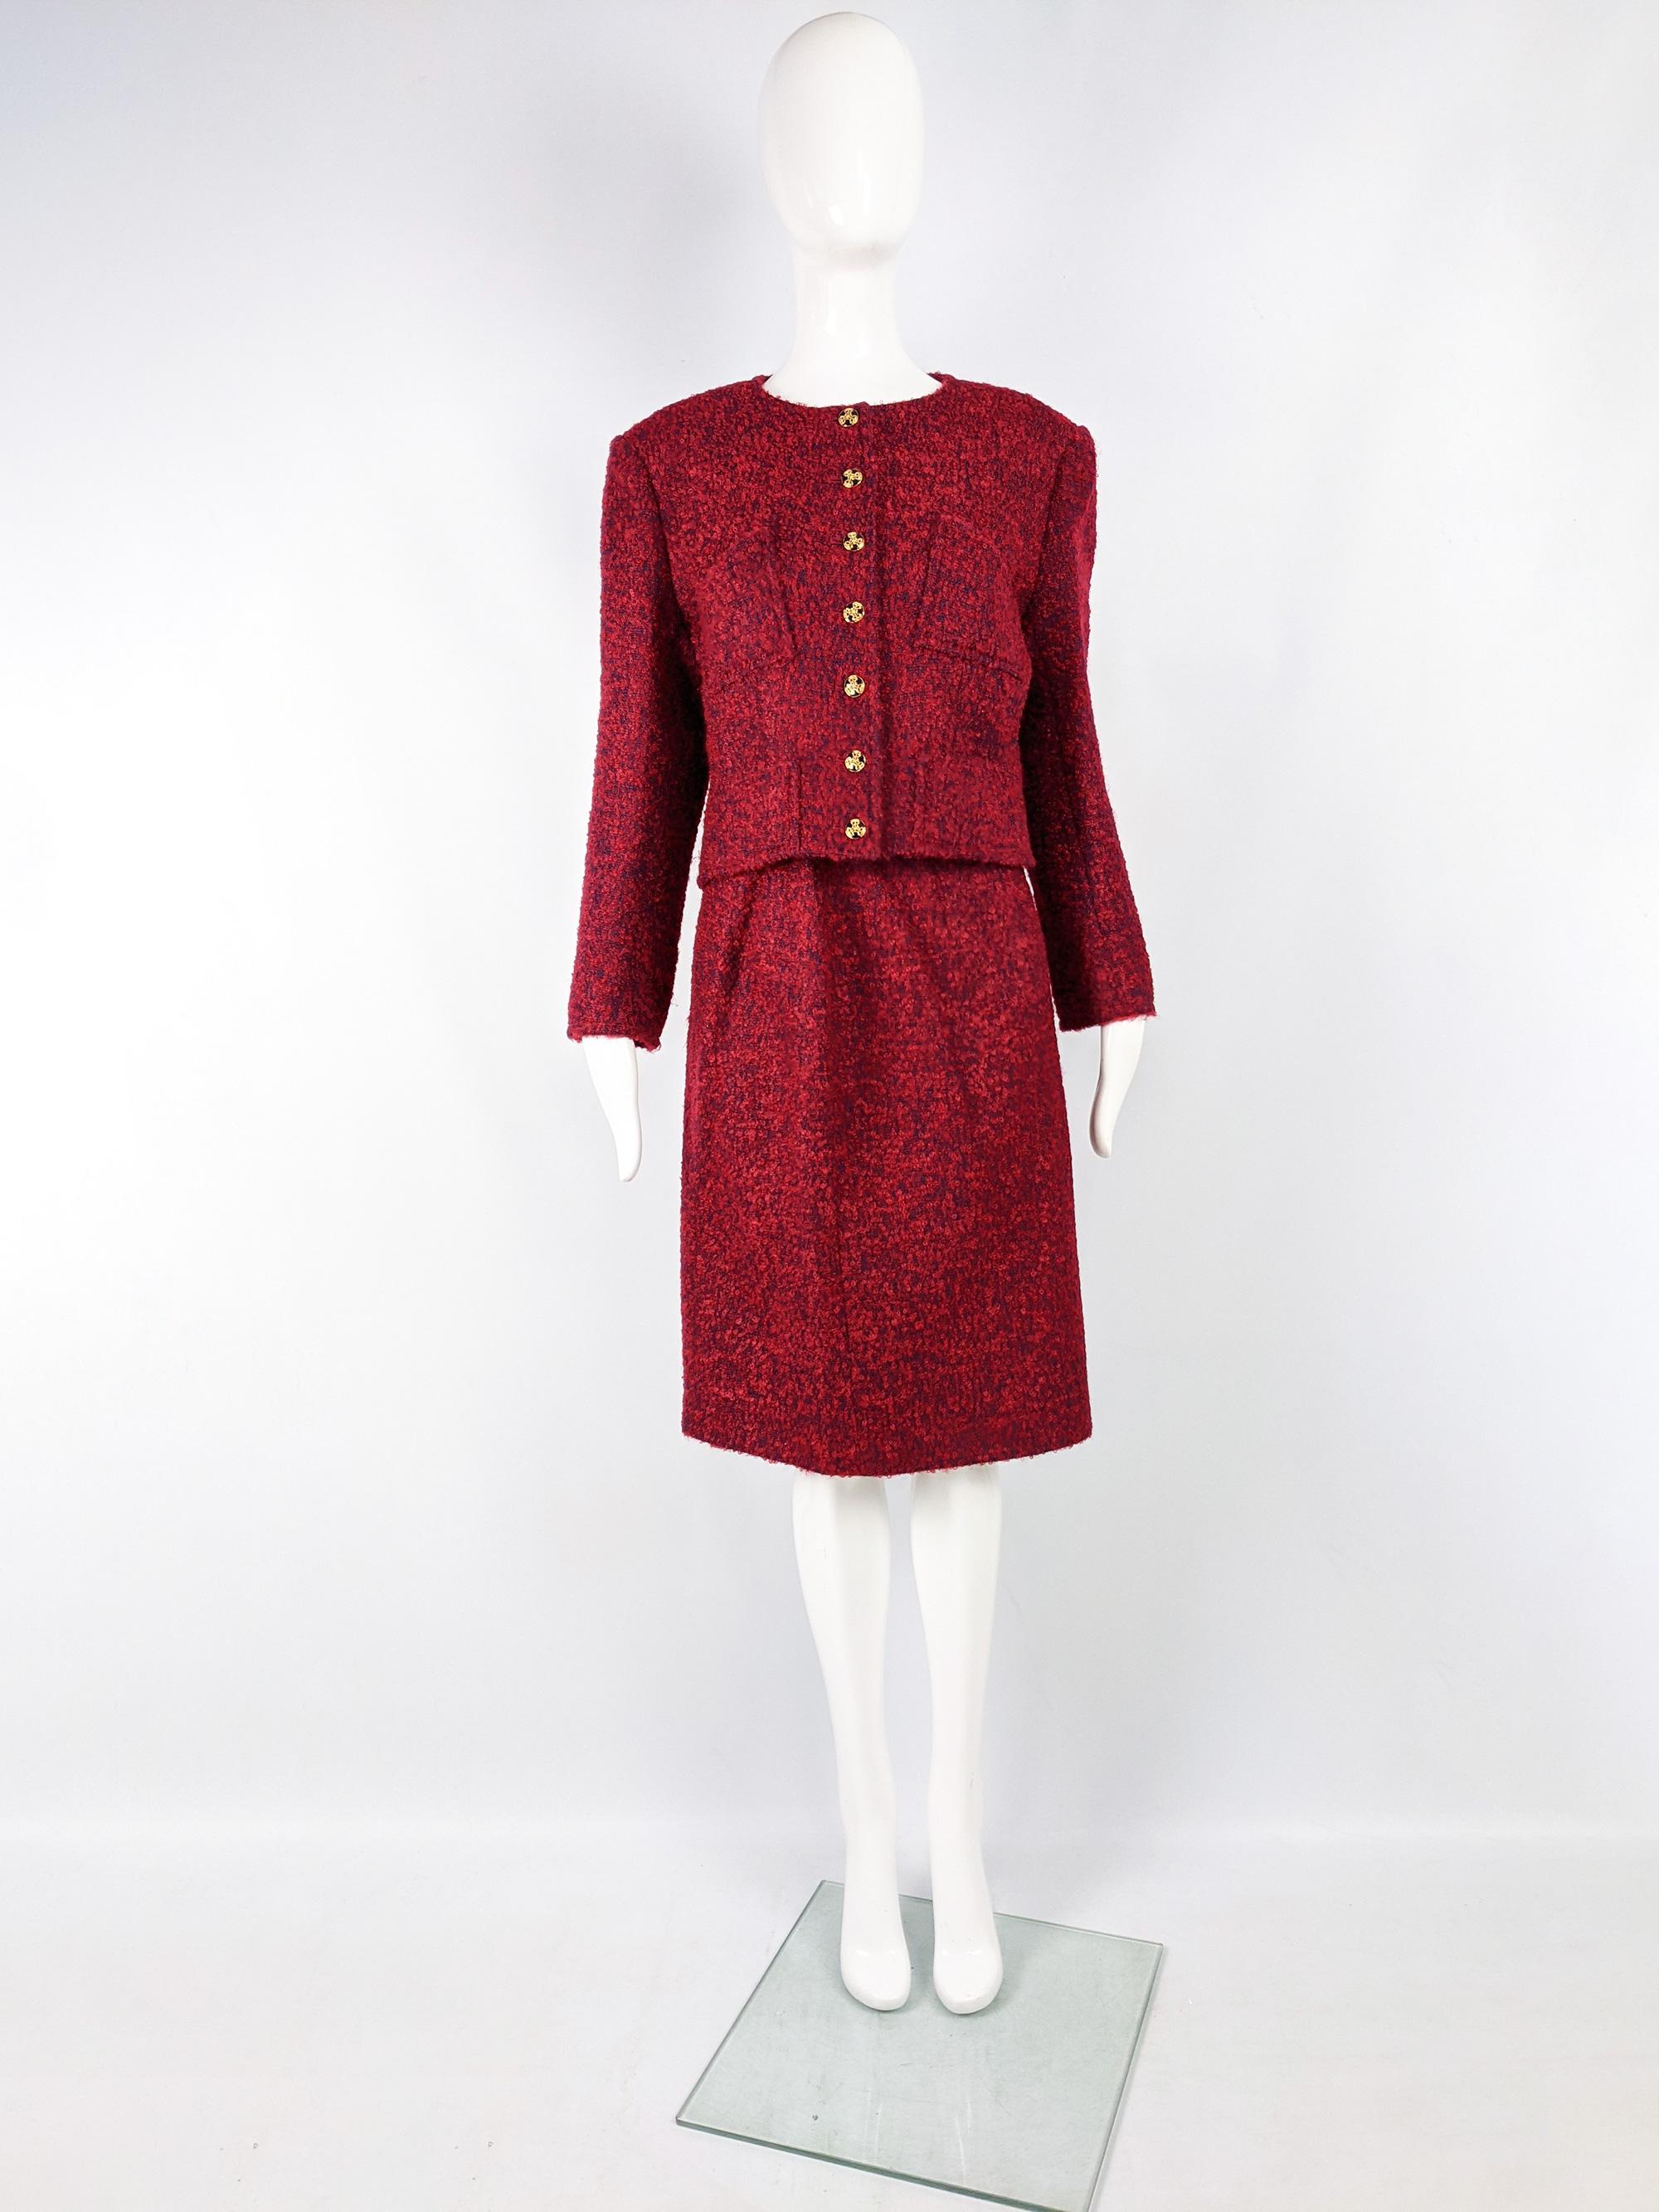 A chic vintage womens skirt suit from the 90s by luxury French fashion designer, Christian Lacroix. In a red and blue chunky mohair and wool tweed boucle fabric with statement buttons typical of lacroix. The blazer is collarless with light shoulder